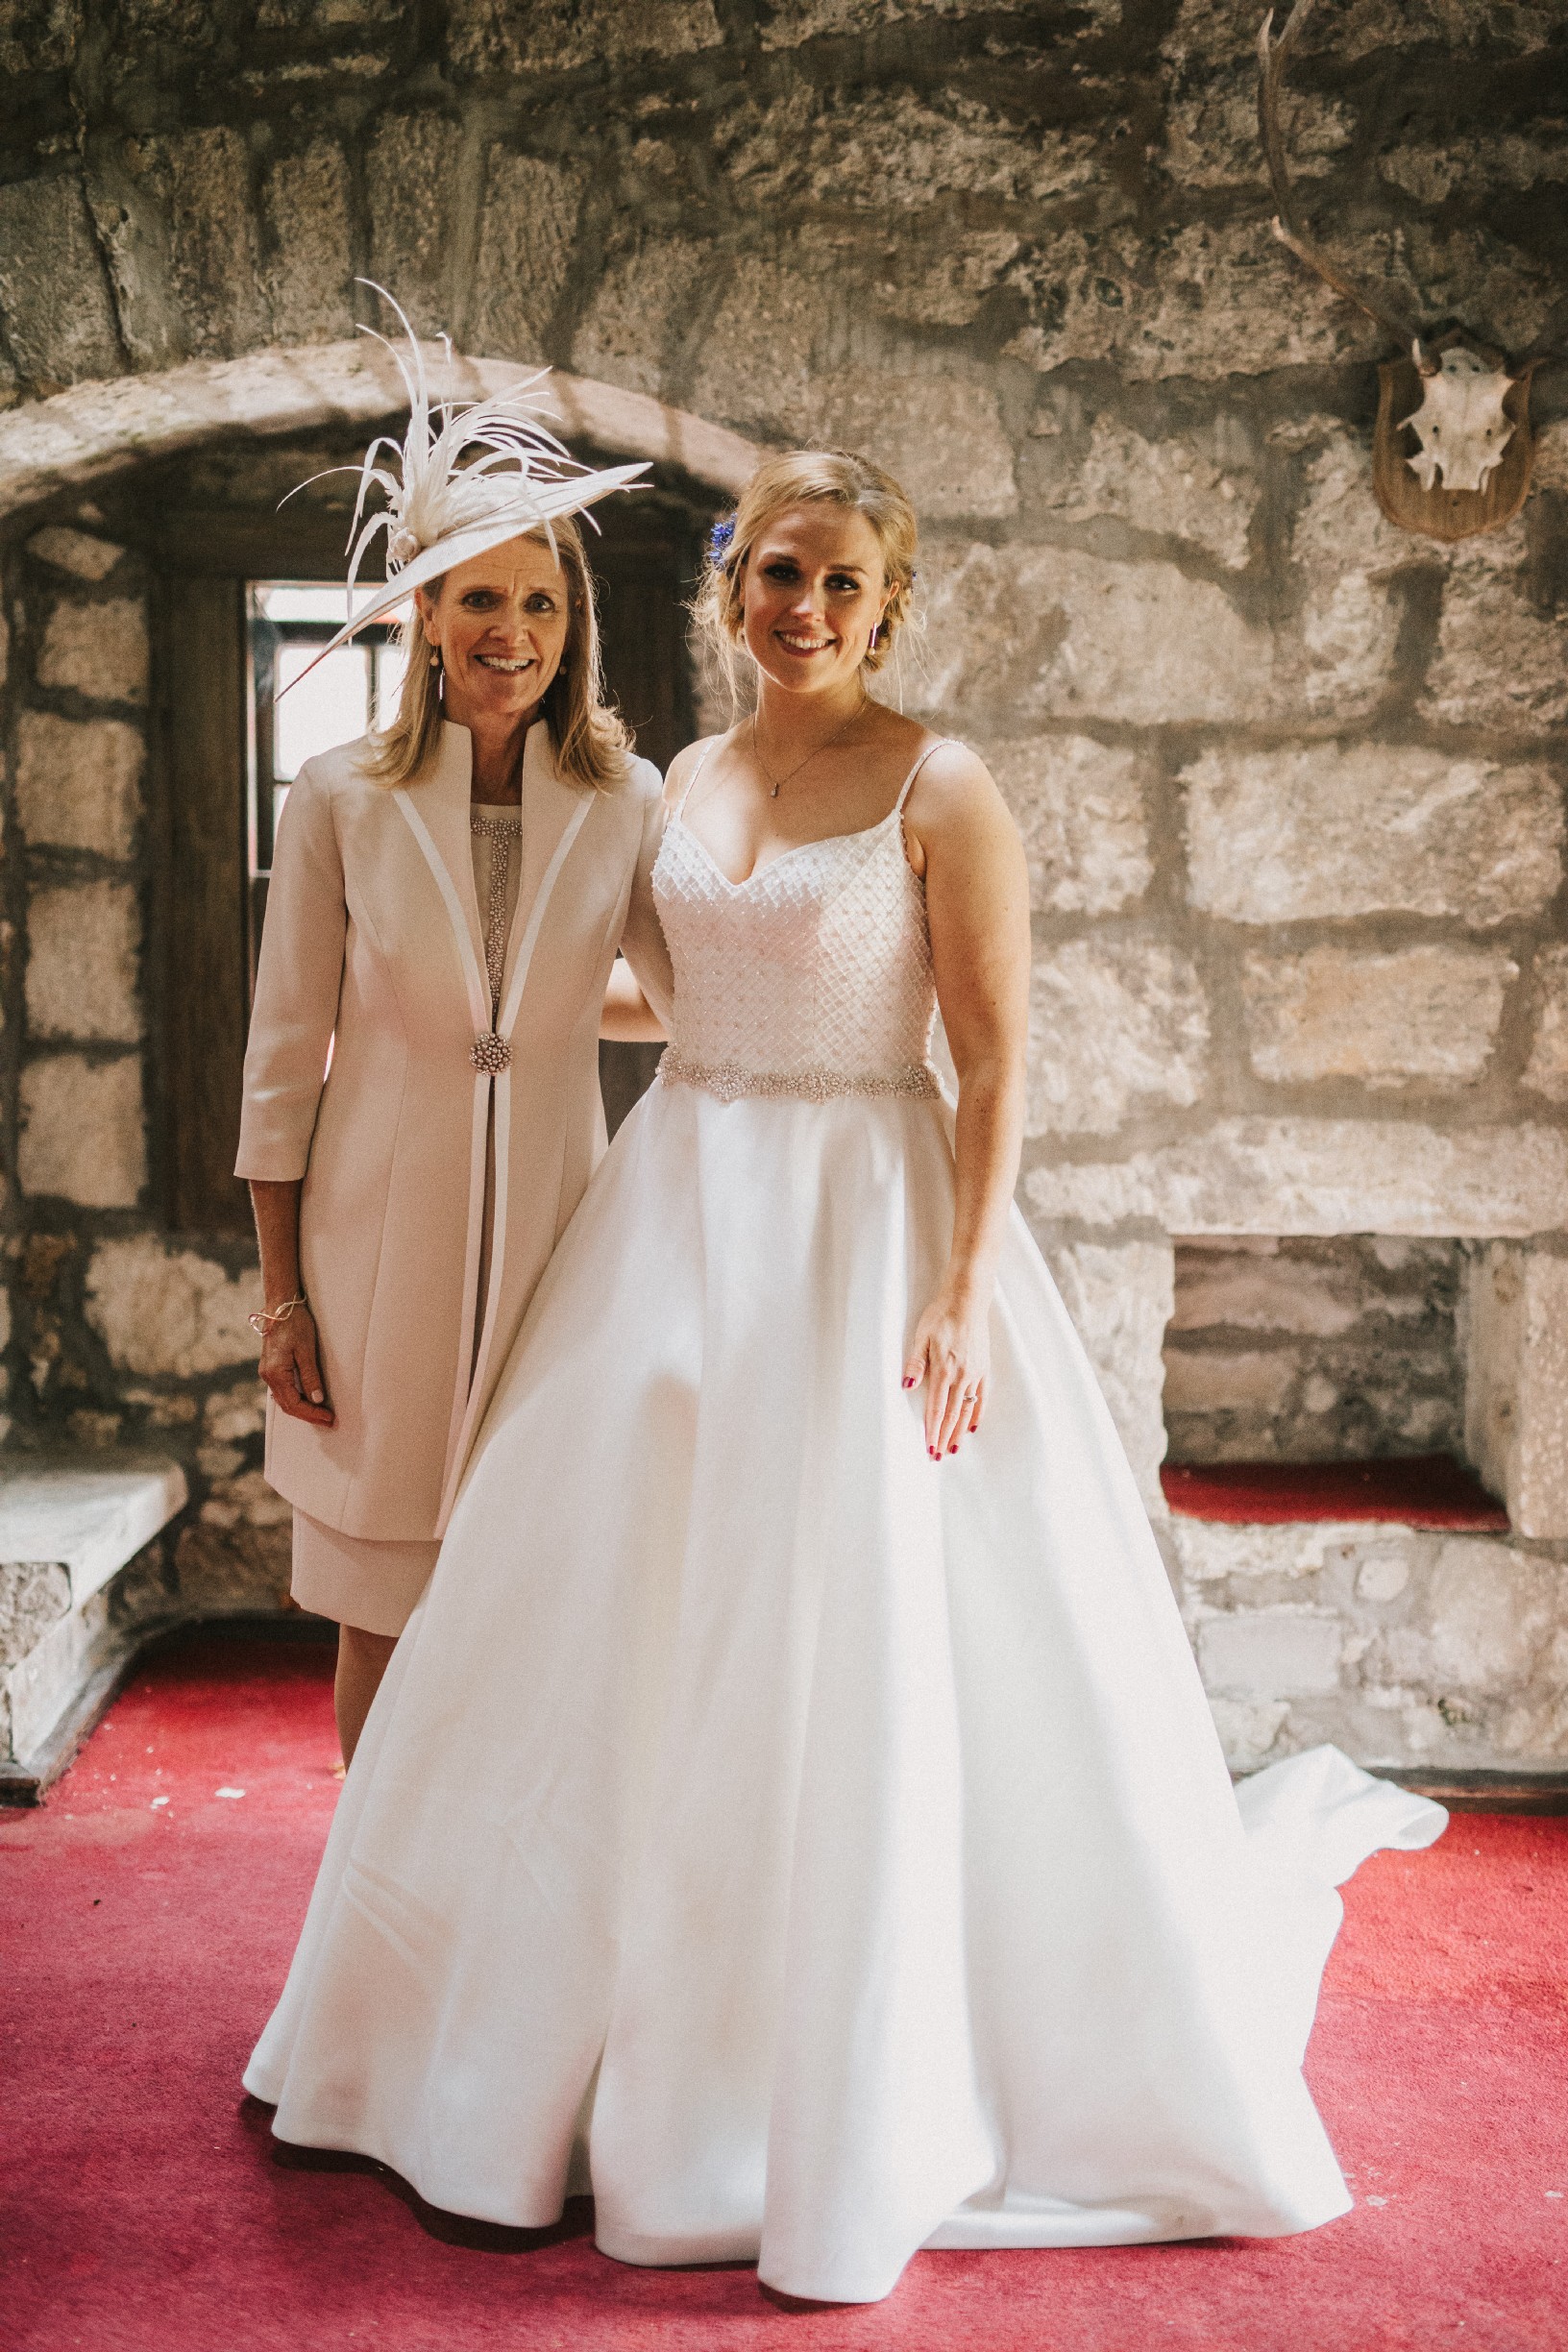 A photo of a bride stood next to her mum inside a castle room wearing an ivory strappy ballgown wedding dress with a sparkle belt